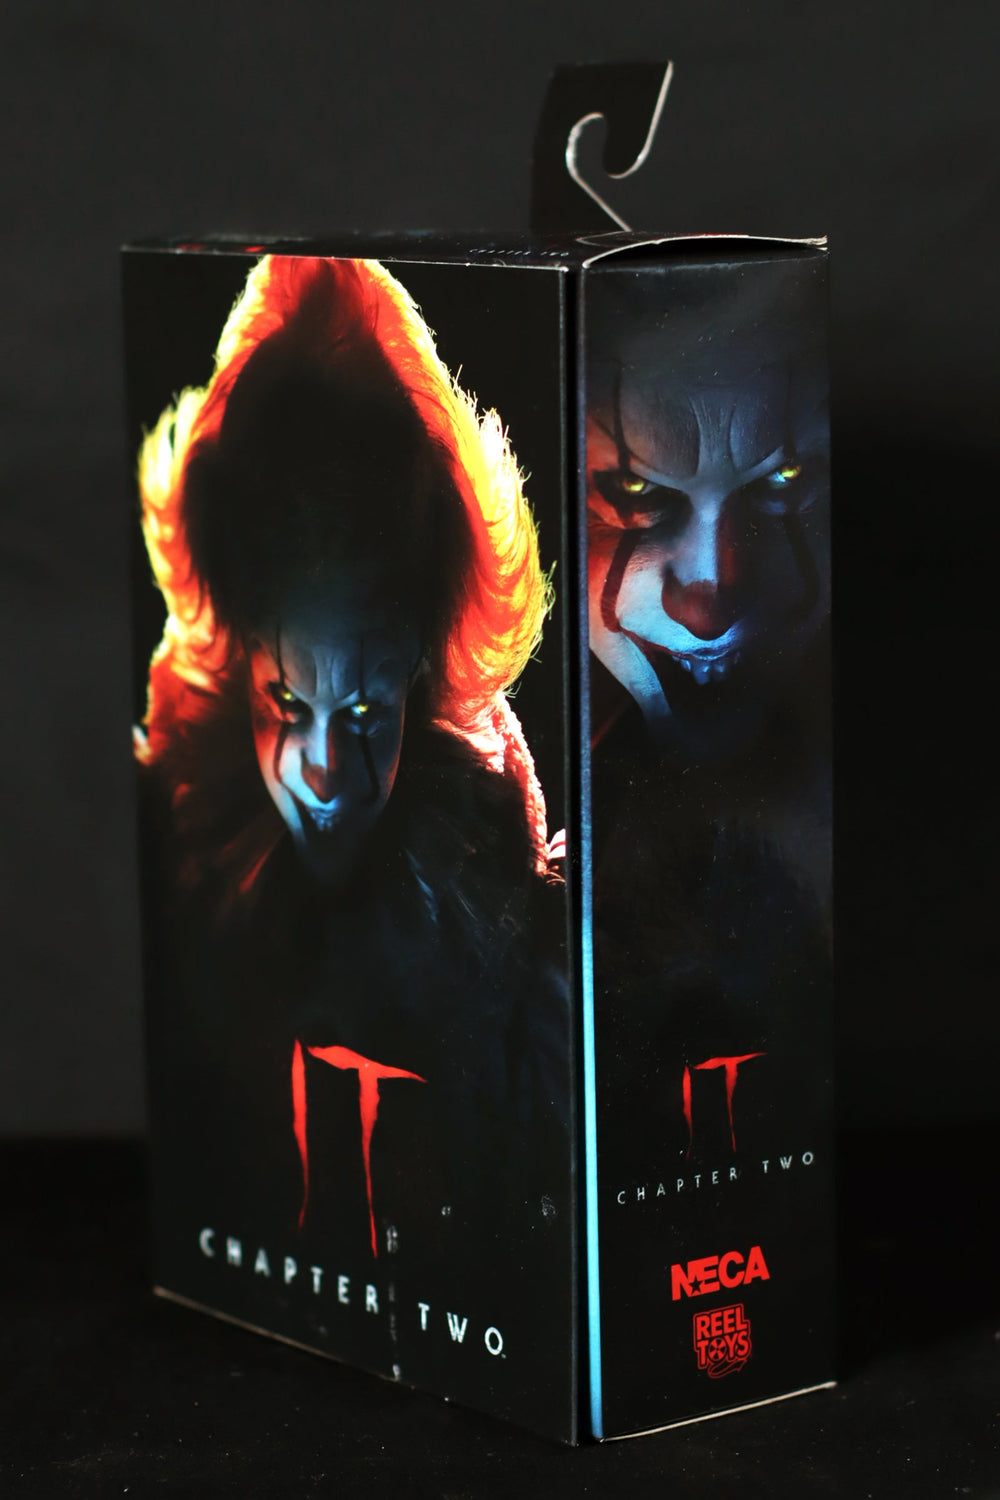 IT: IT Chapter Two: “Pennywise” NECA